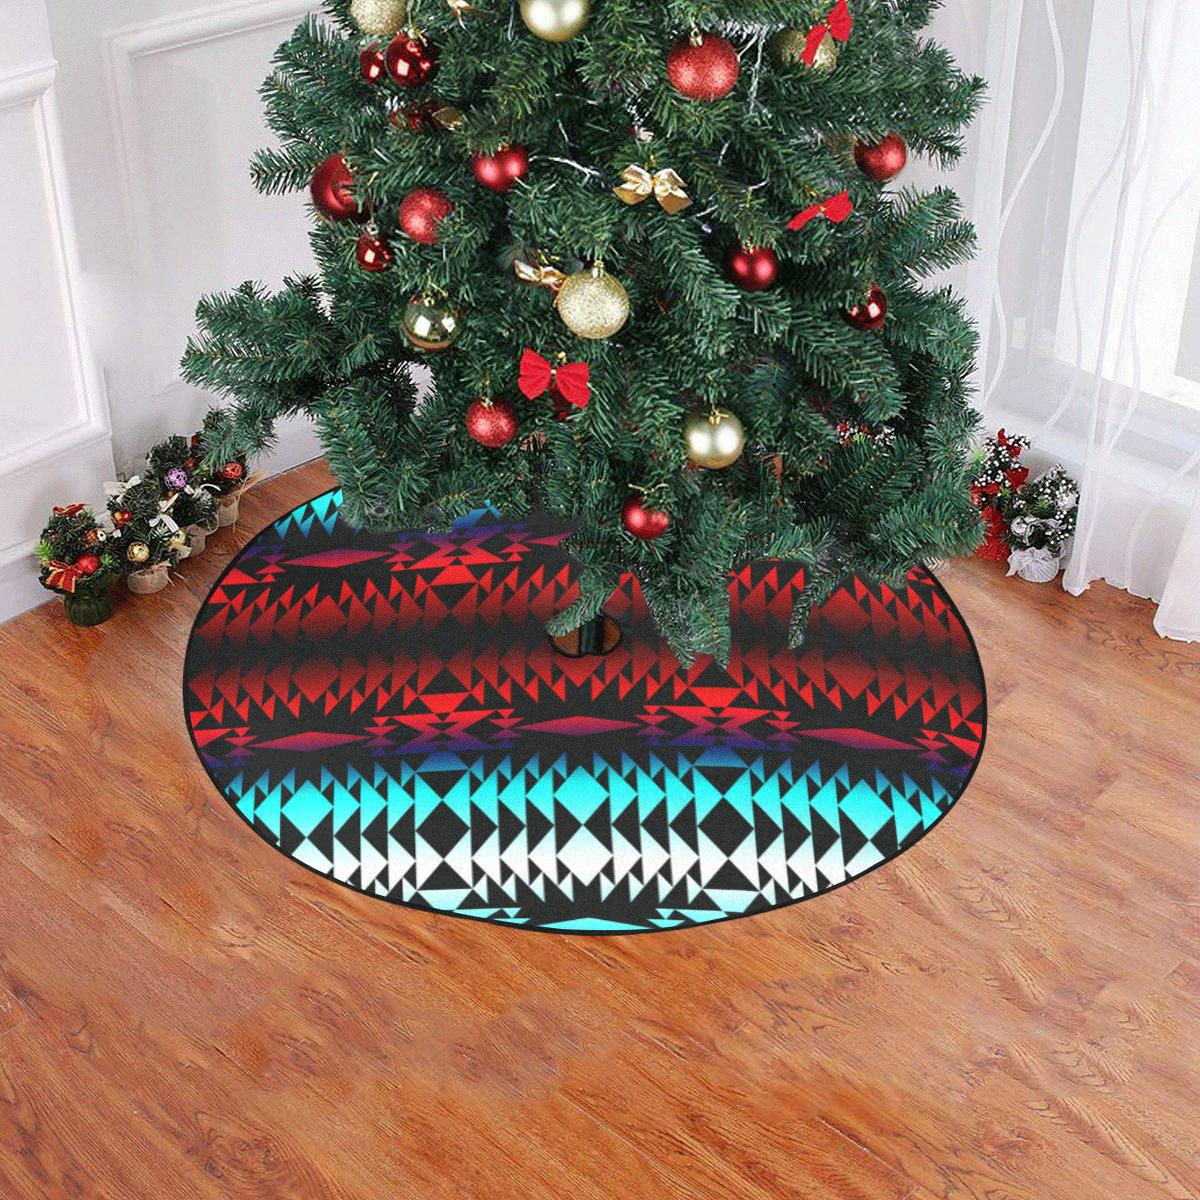 In Between Two Worlds Christmas Tree Skirt 47" x 47" Christmas Tree Skirt e-joyer 